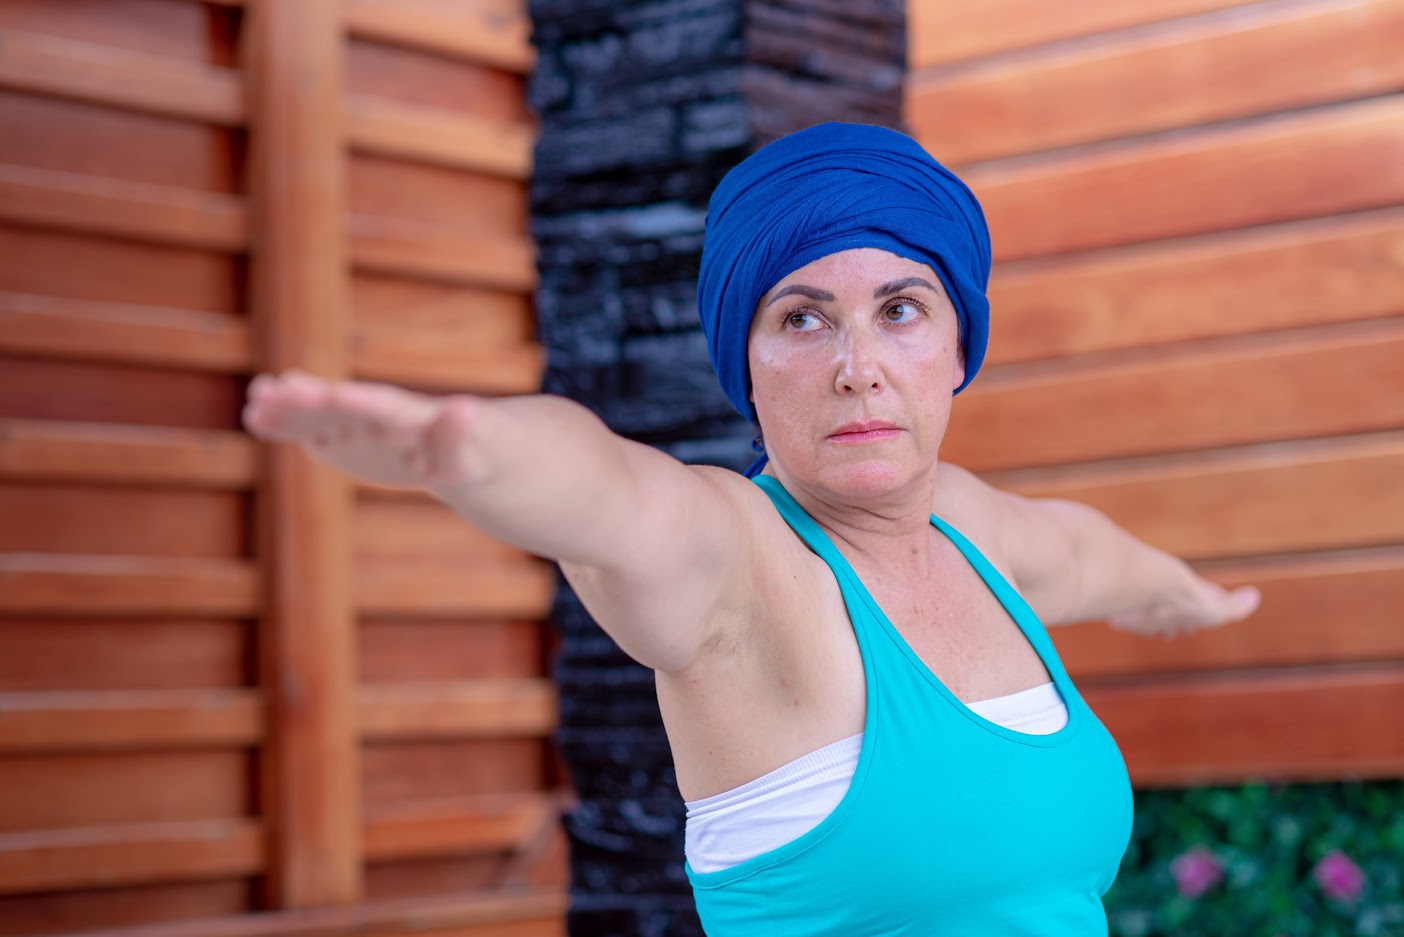 Exercise and diet for cancer patients